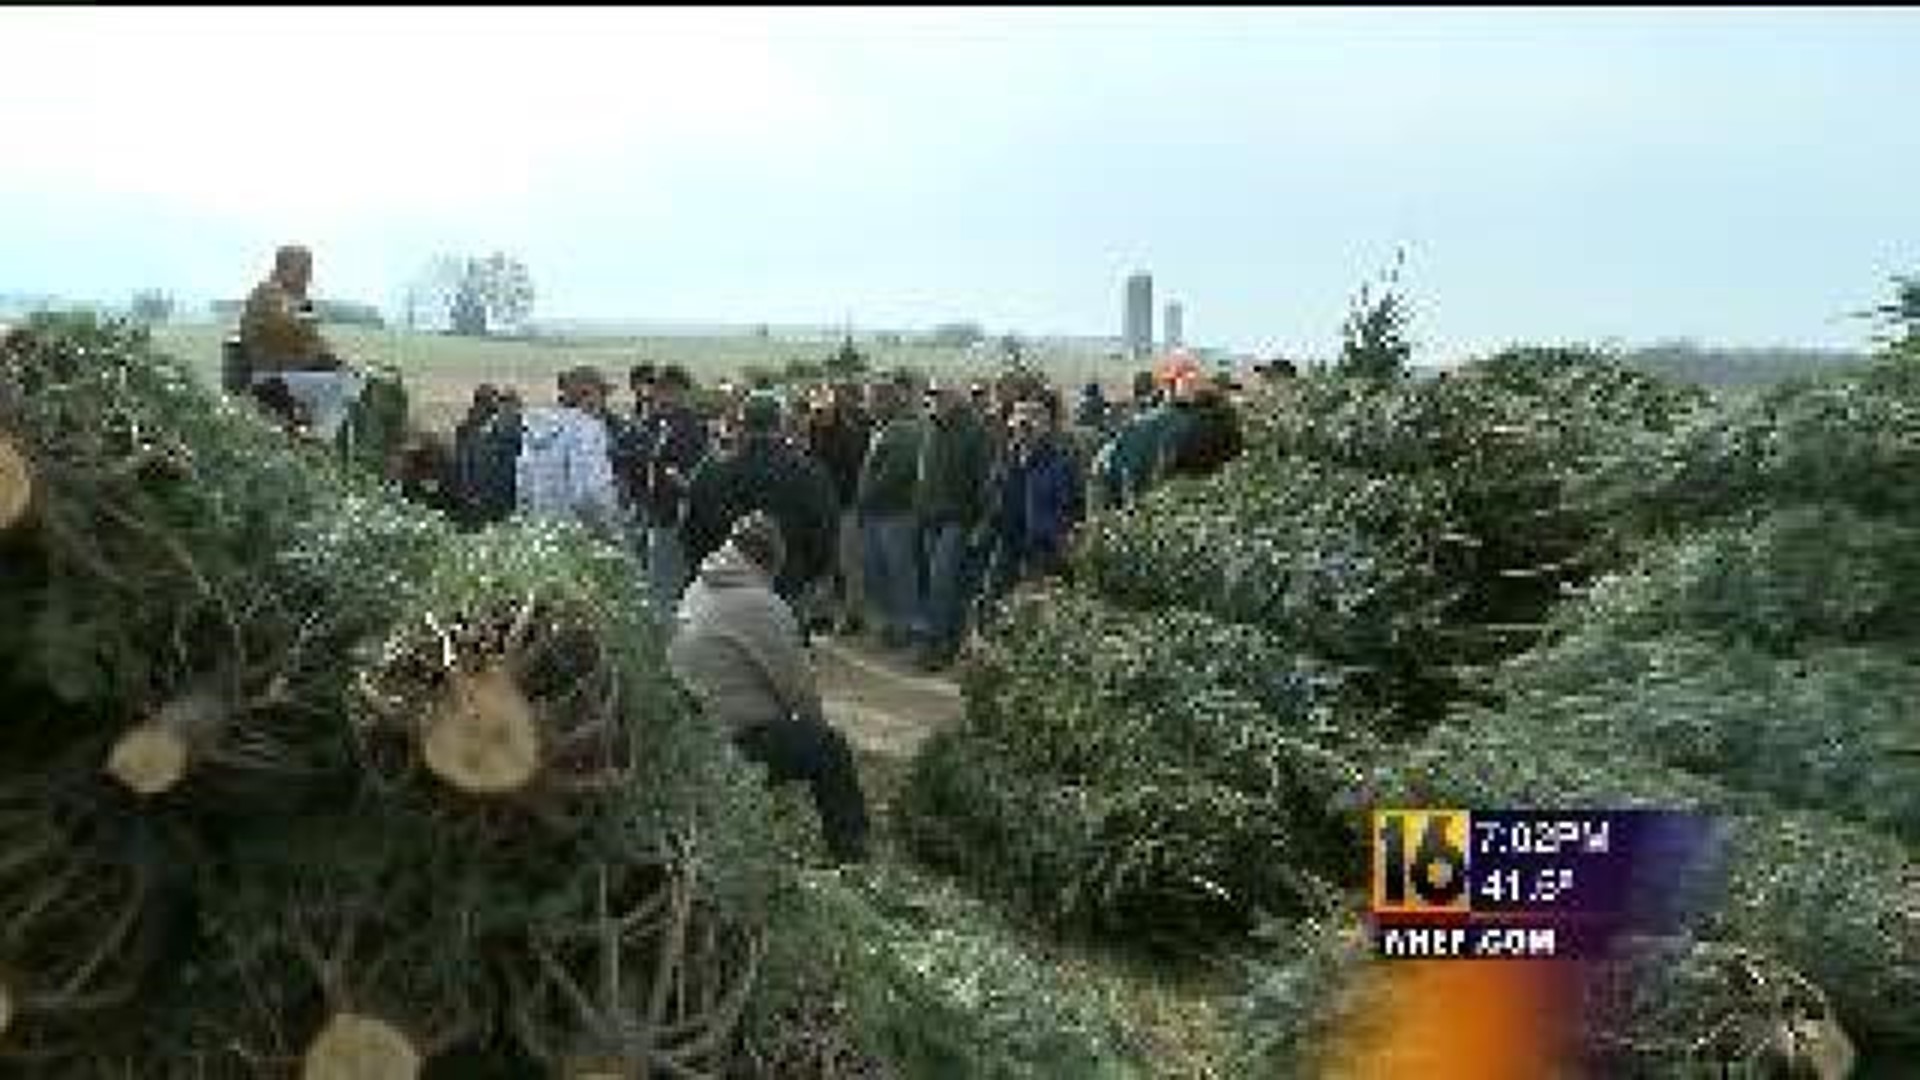 80,000 Christmas Trees Auctioned Off